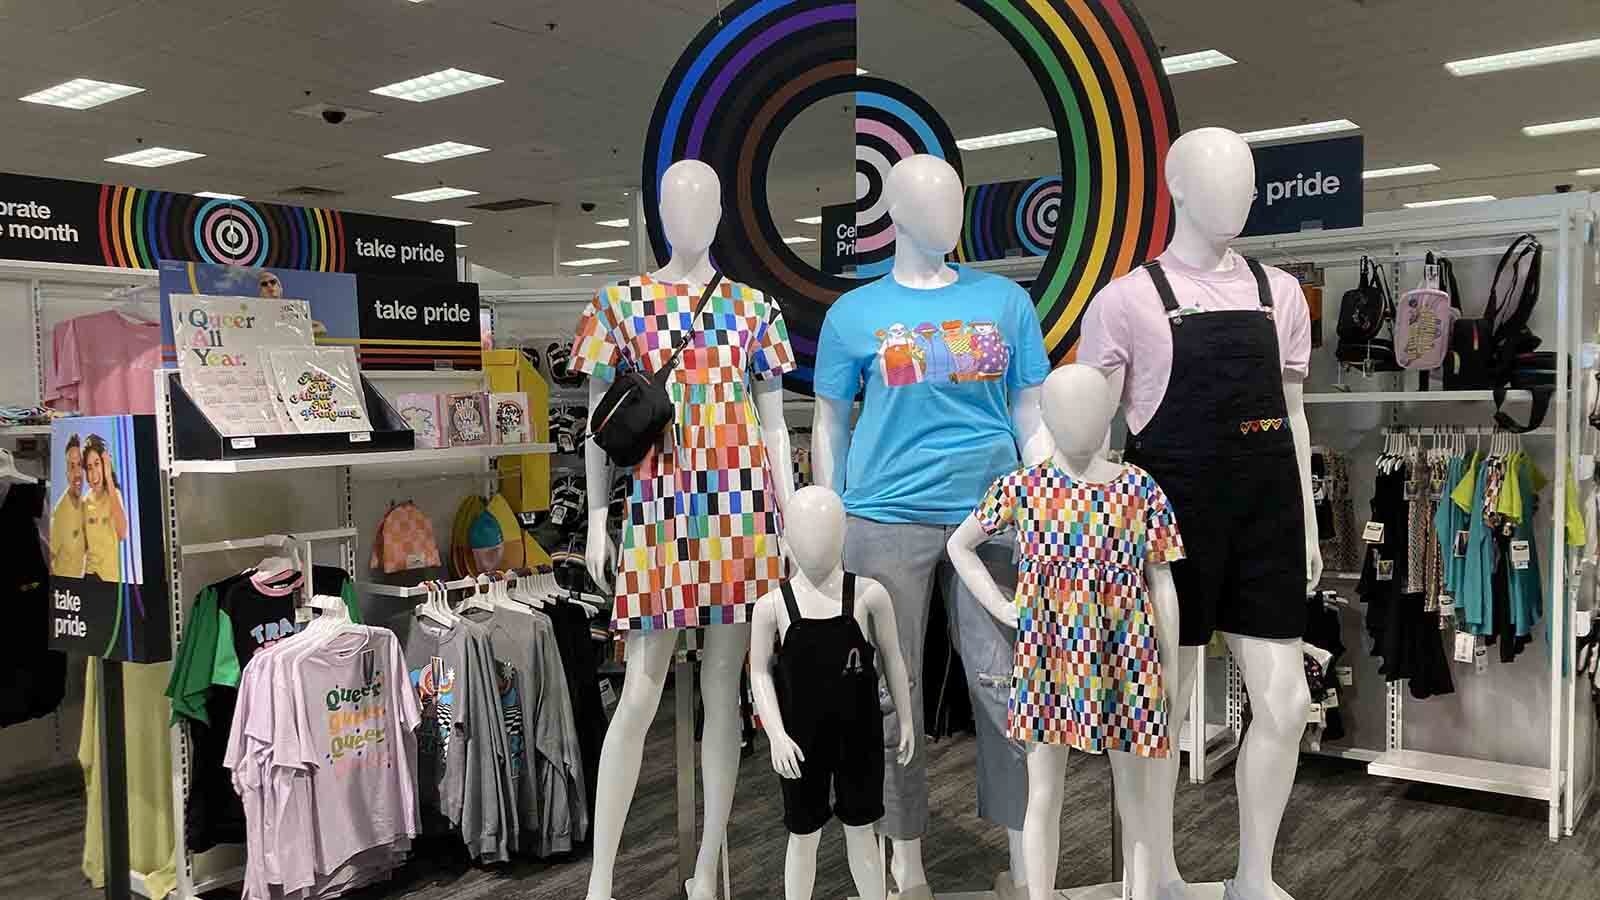 Casper Target Moves Its LGBTQ Pride Collection To The Back Of The Store